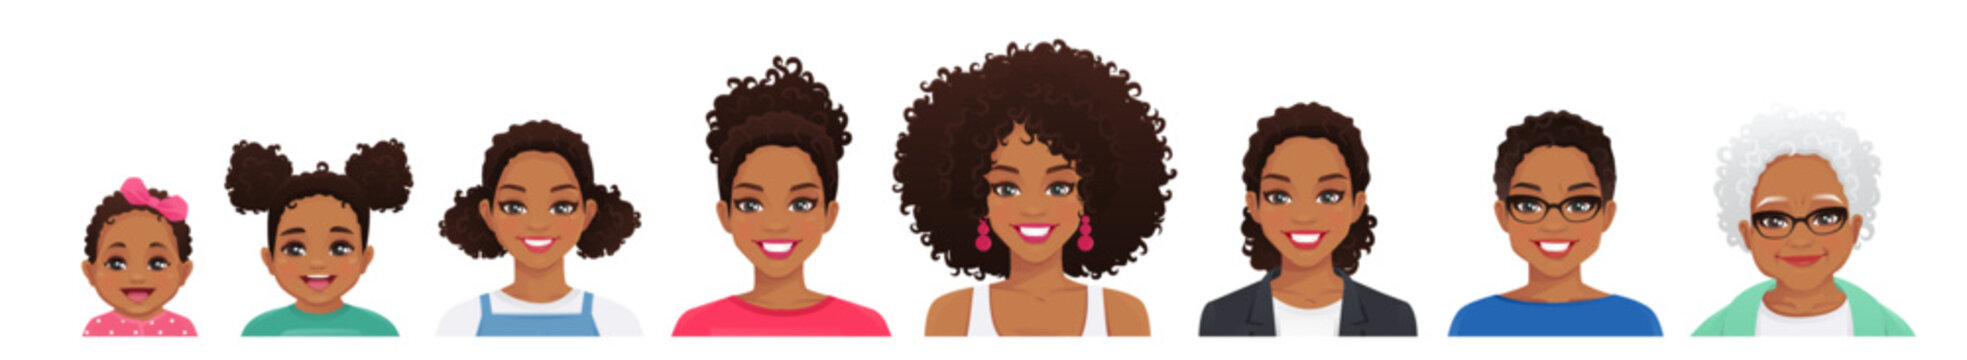 African woman of different life stages cartoon characters avatars. Baby, child, teenager, adult, mature and old persons vector illustration isolated